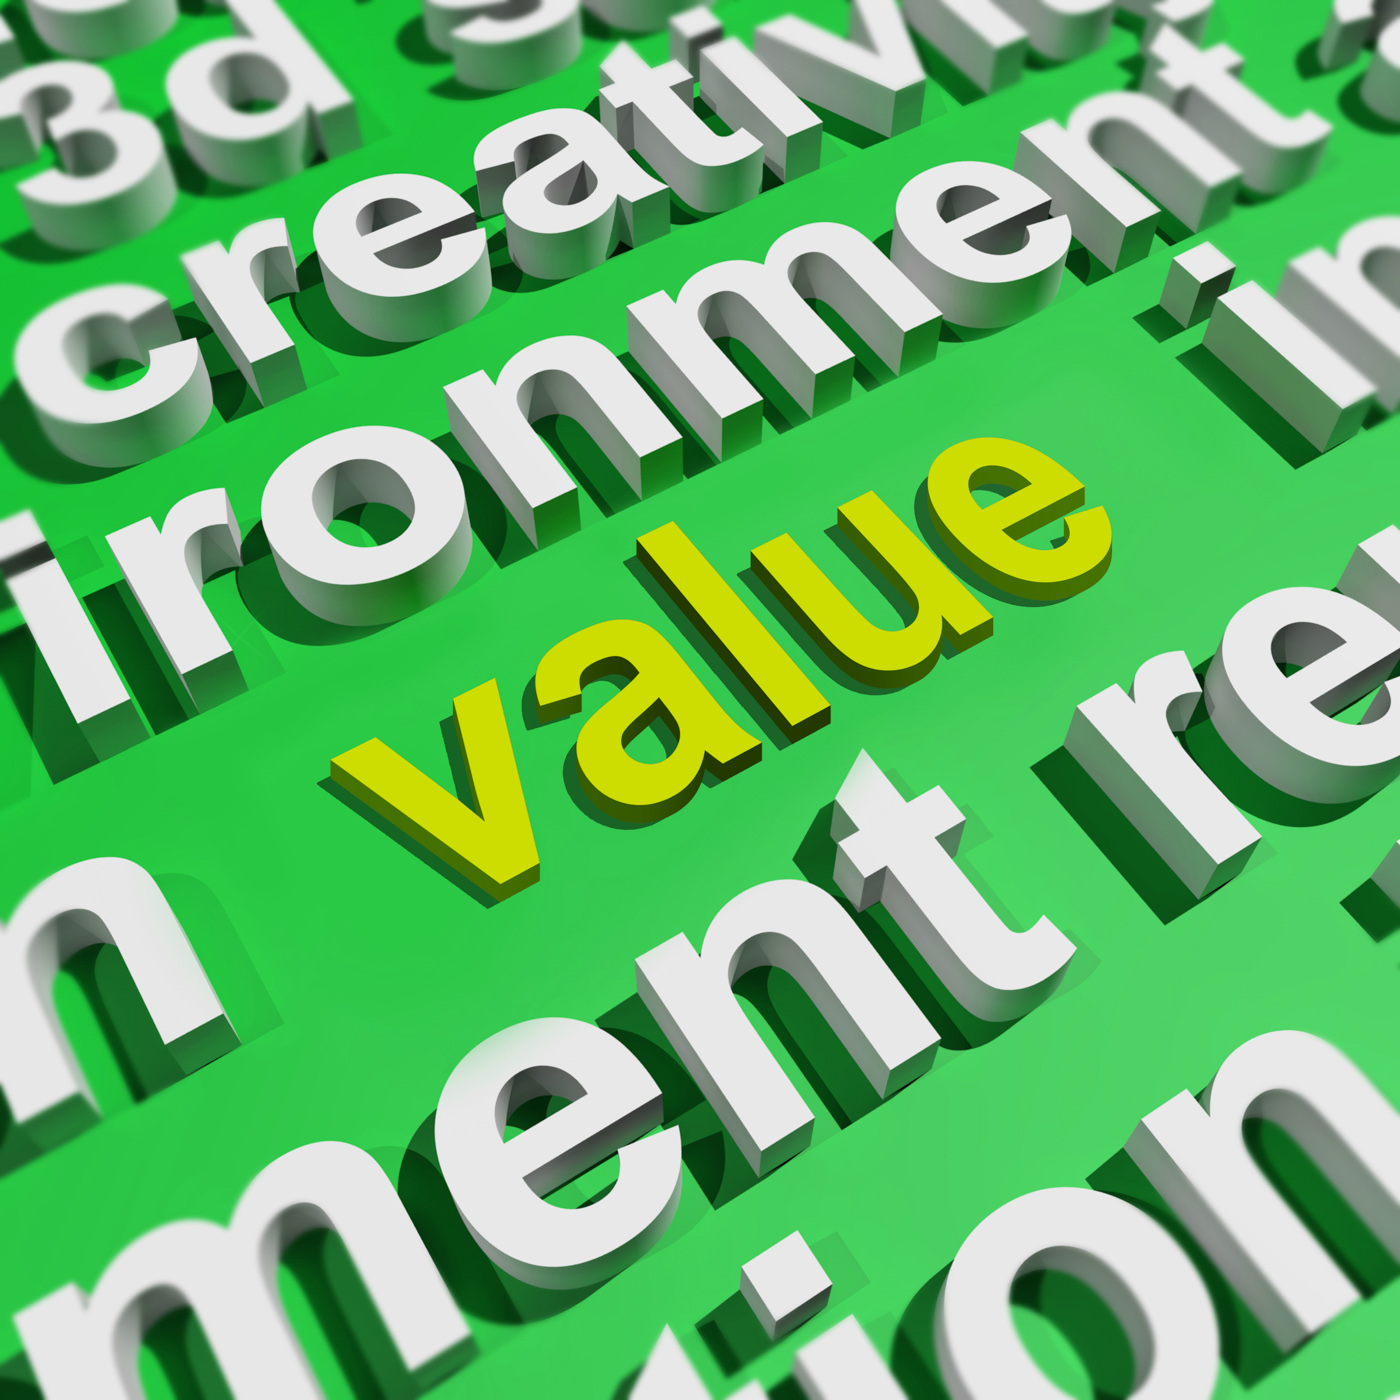 Value in word cloud shows worth importance or significance photo